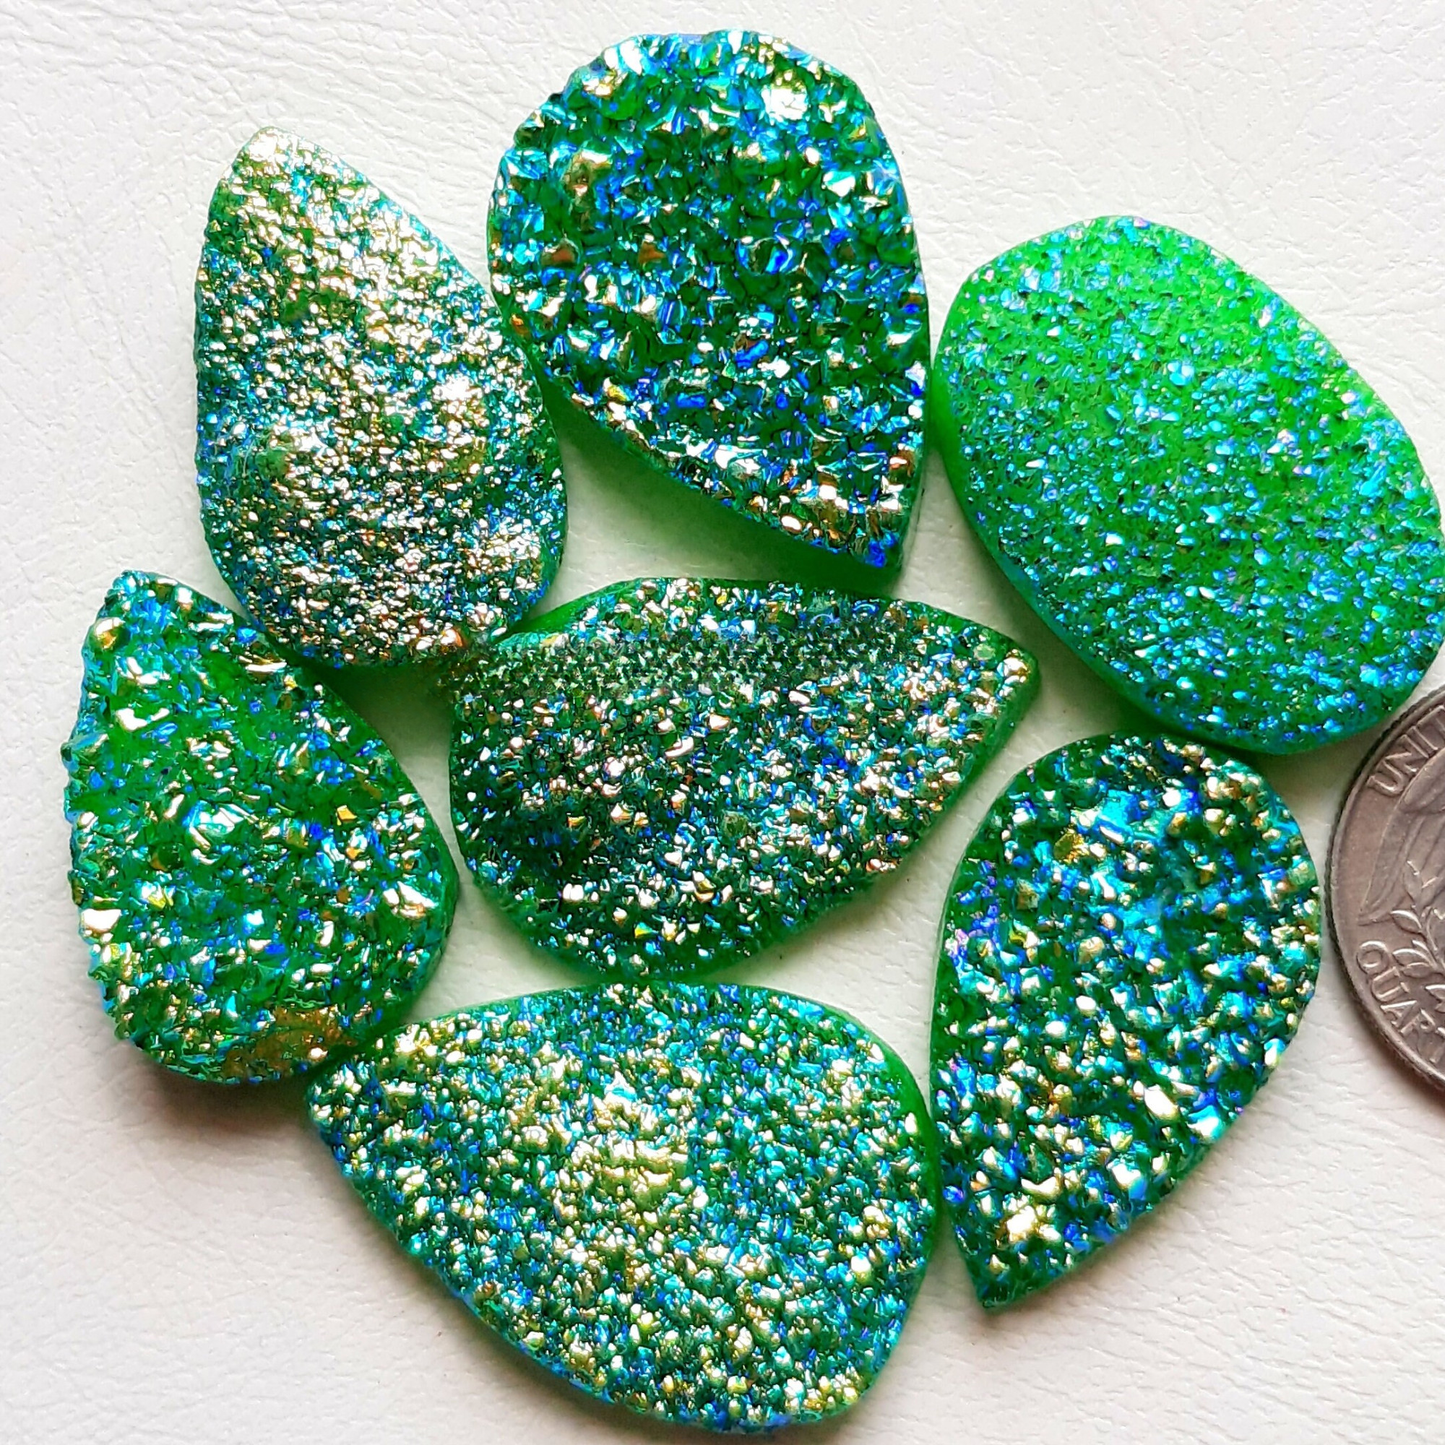 Green Color Titanium Coated Druzy Stone Cabochon Wholesale Lot Gemstone By Pieces With Different Shapes And Sizes Used For Jewelry Making